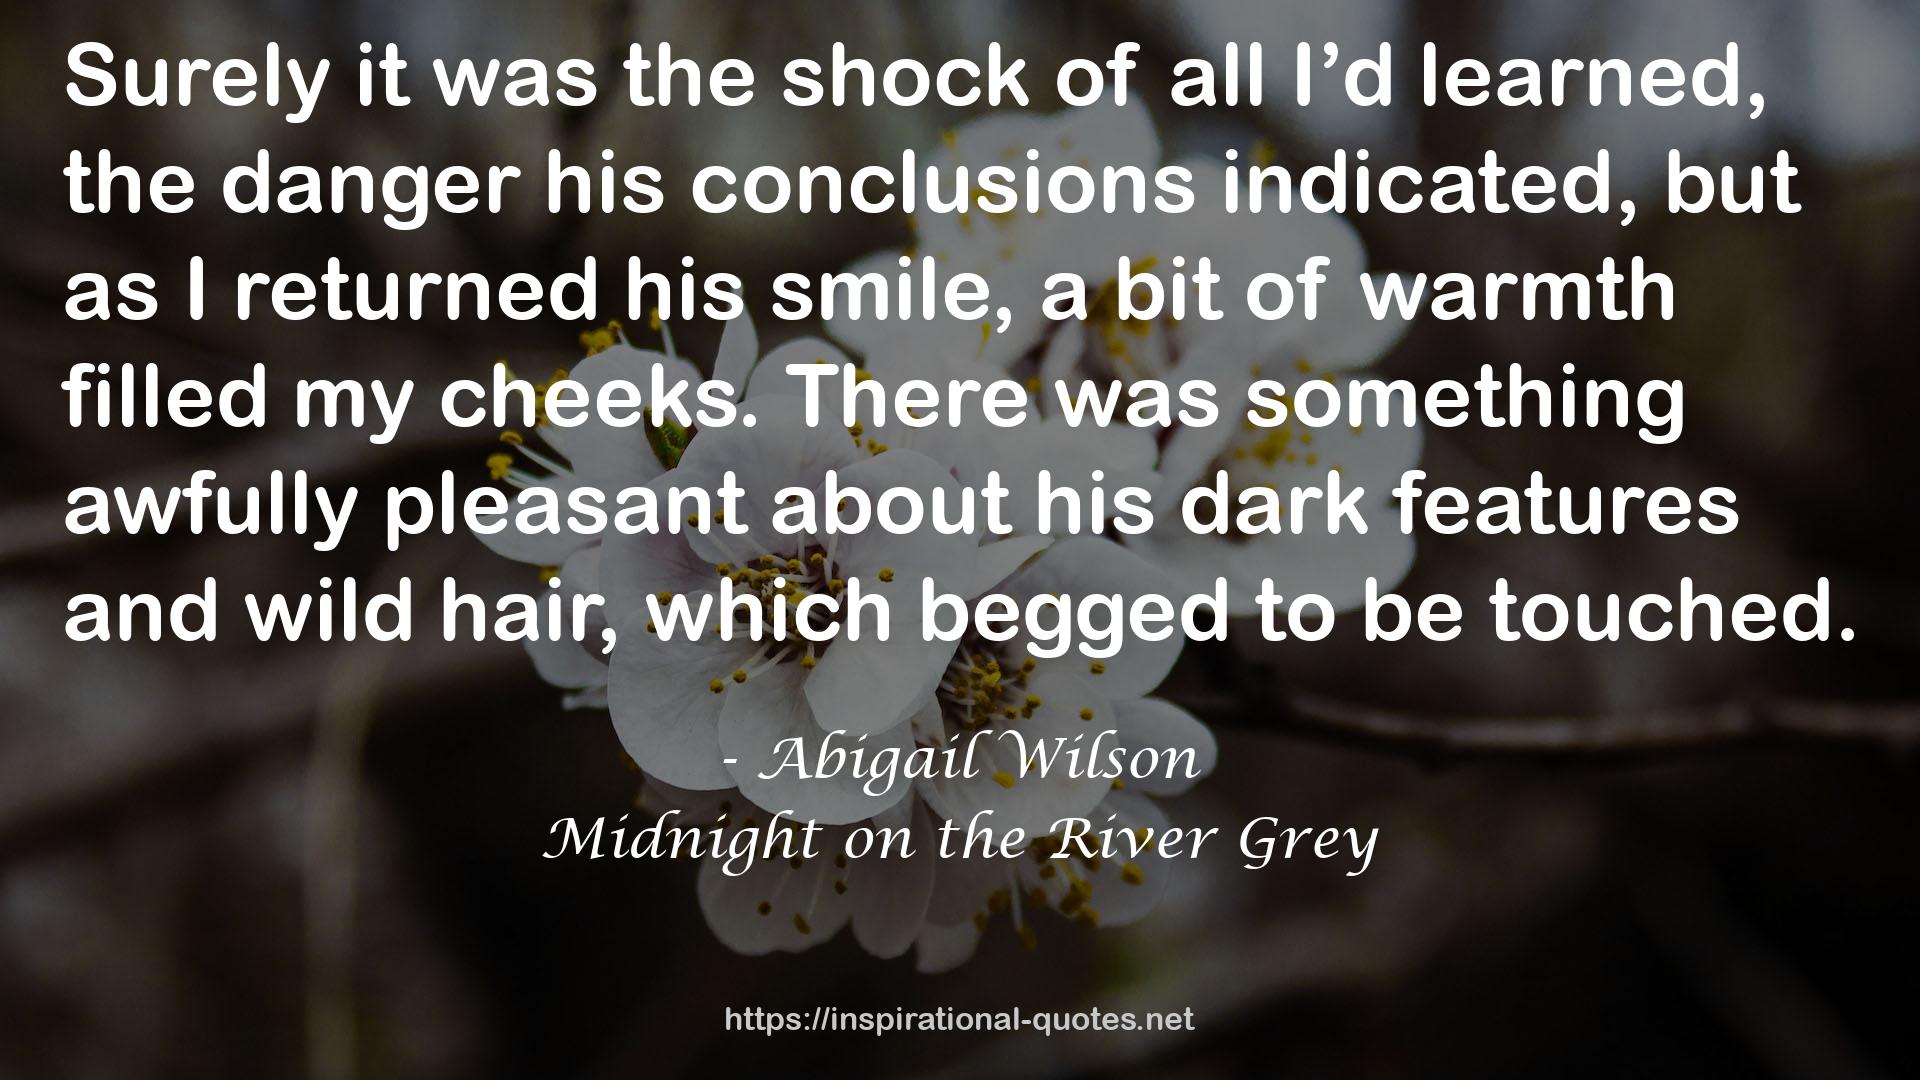 Midnight on the River Grey QUOTES